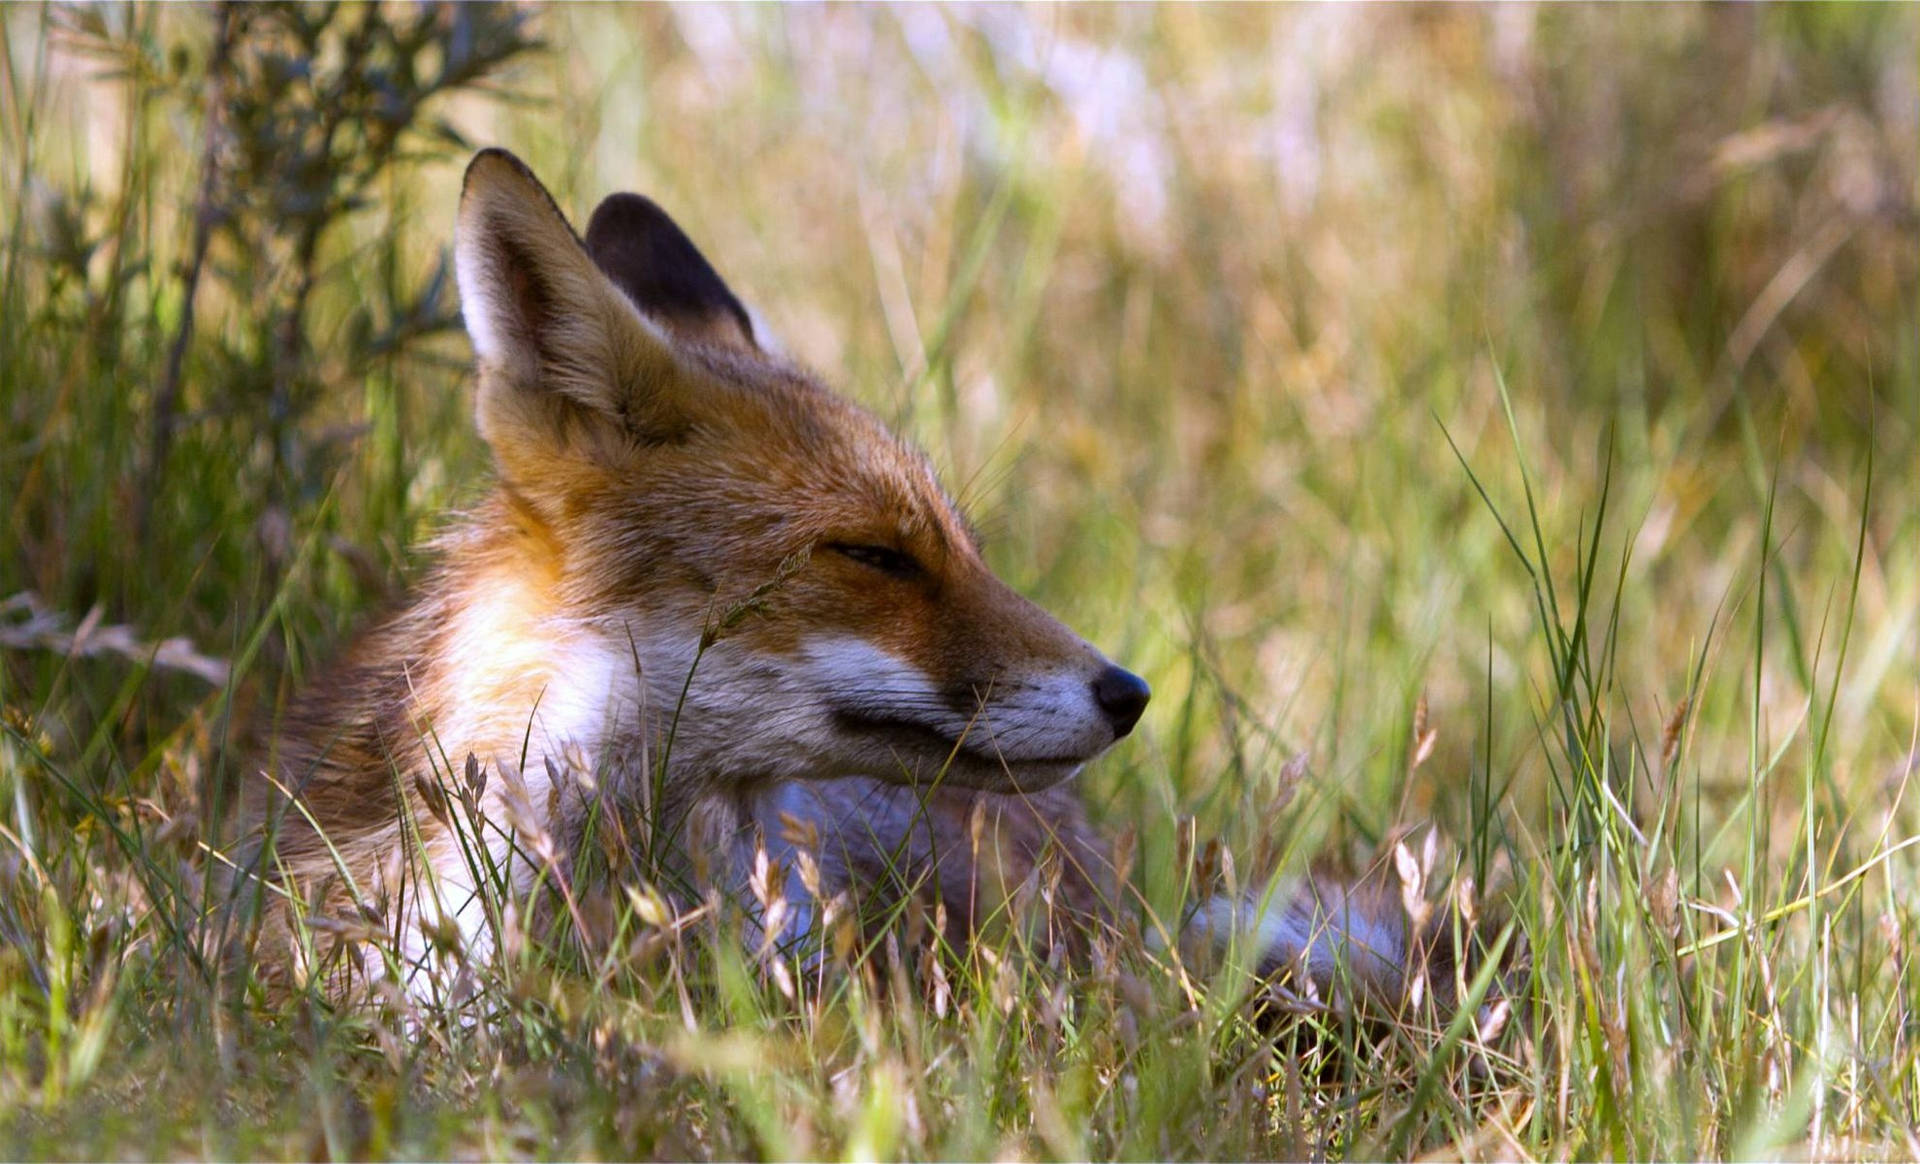 A sly fox naps in the grass Wallpaper